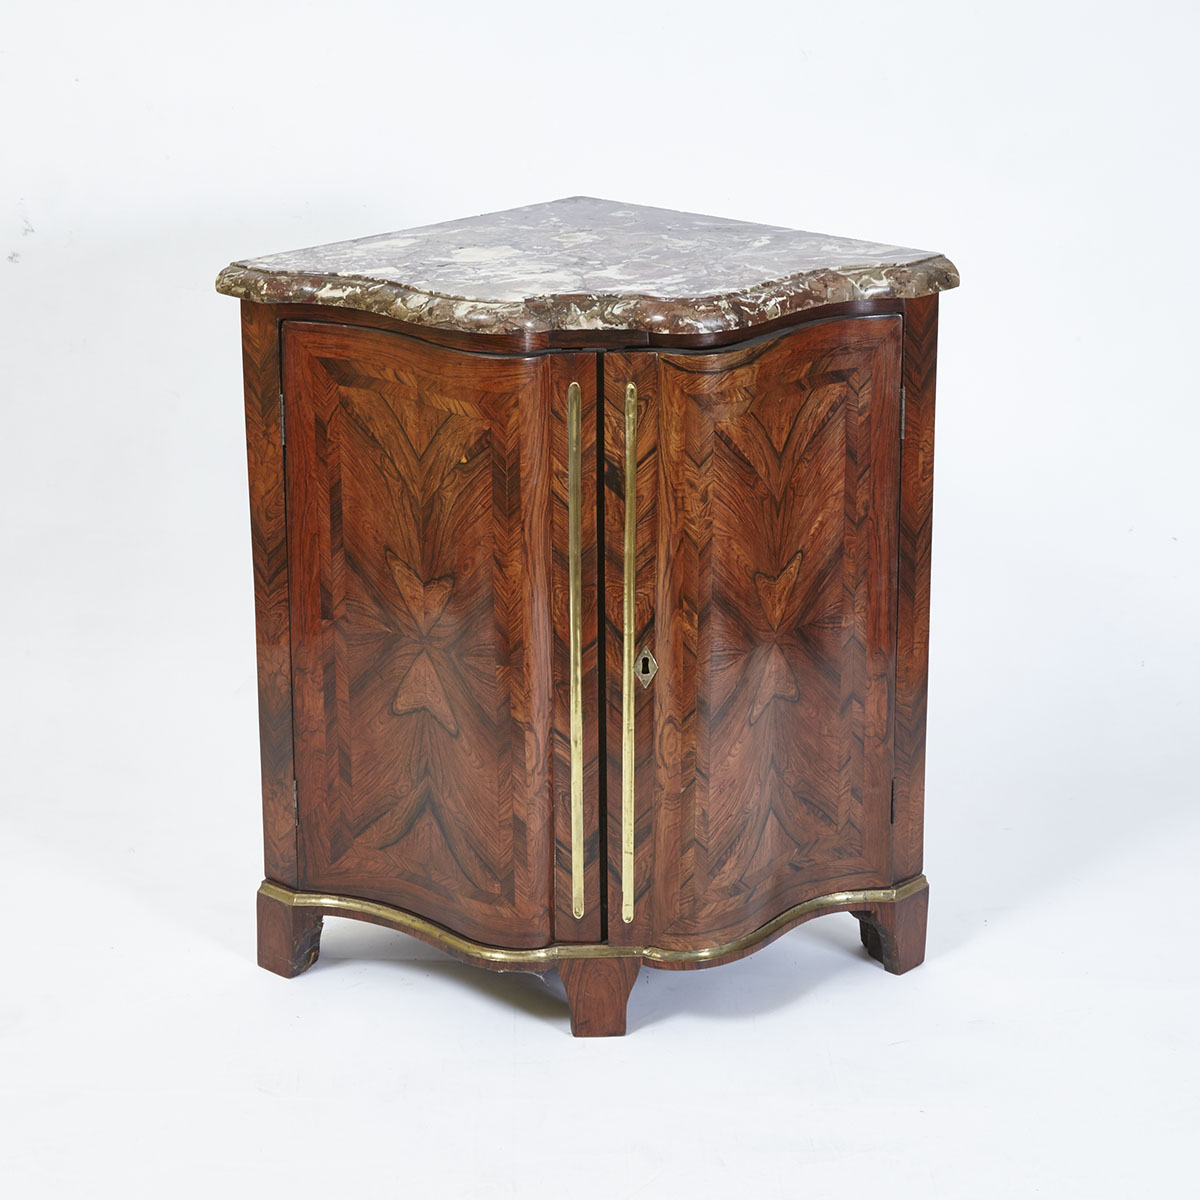 Continental Rosewood Parquetry Corner Cupboard, possibly French, mid 19th century